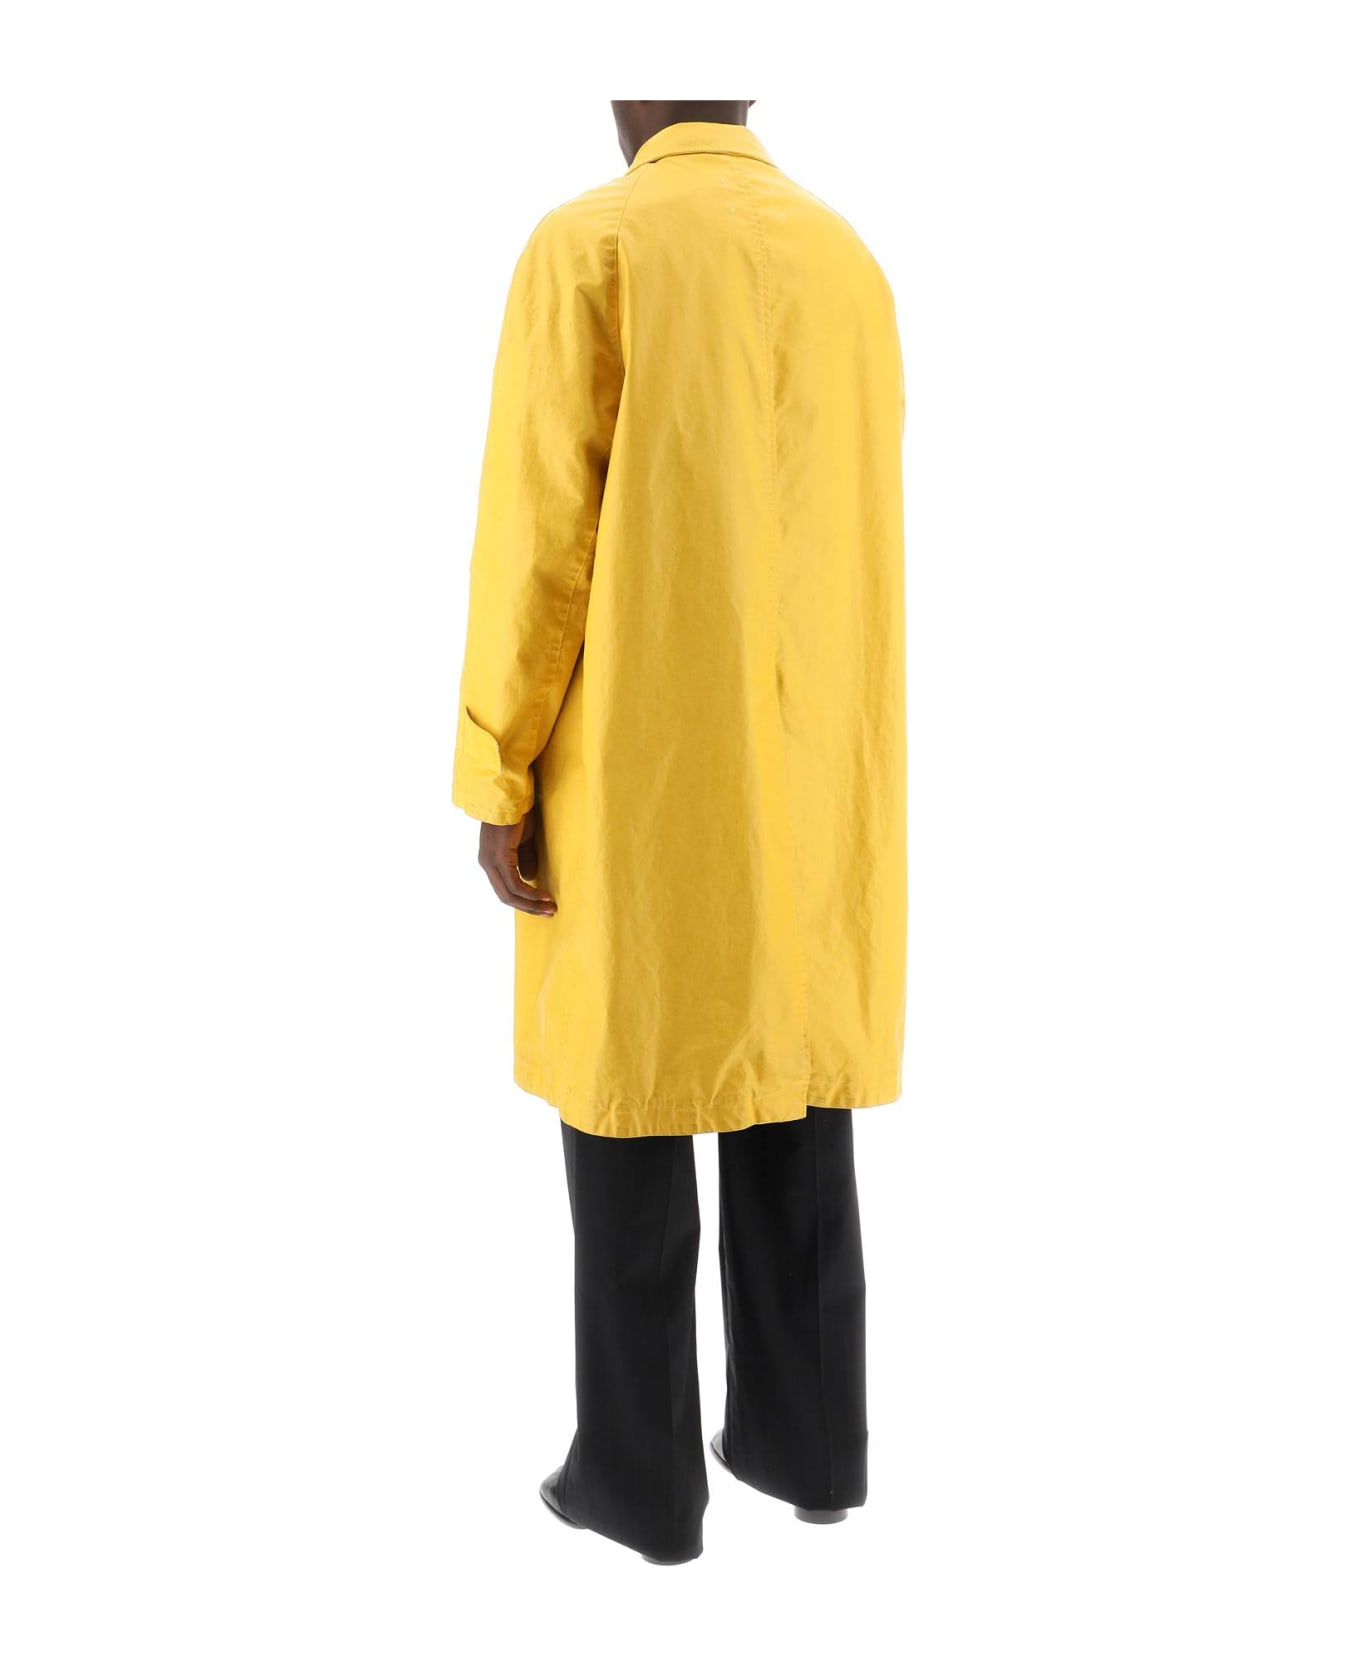 Maison Margiela Trench Coat In Worn-out Effect Coated Cotton - YELLOW (Yellow) コート